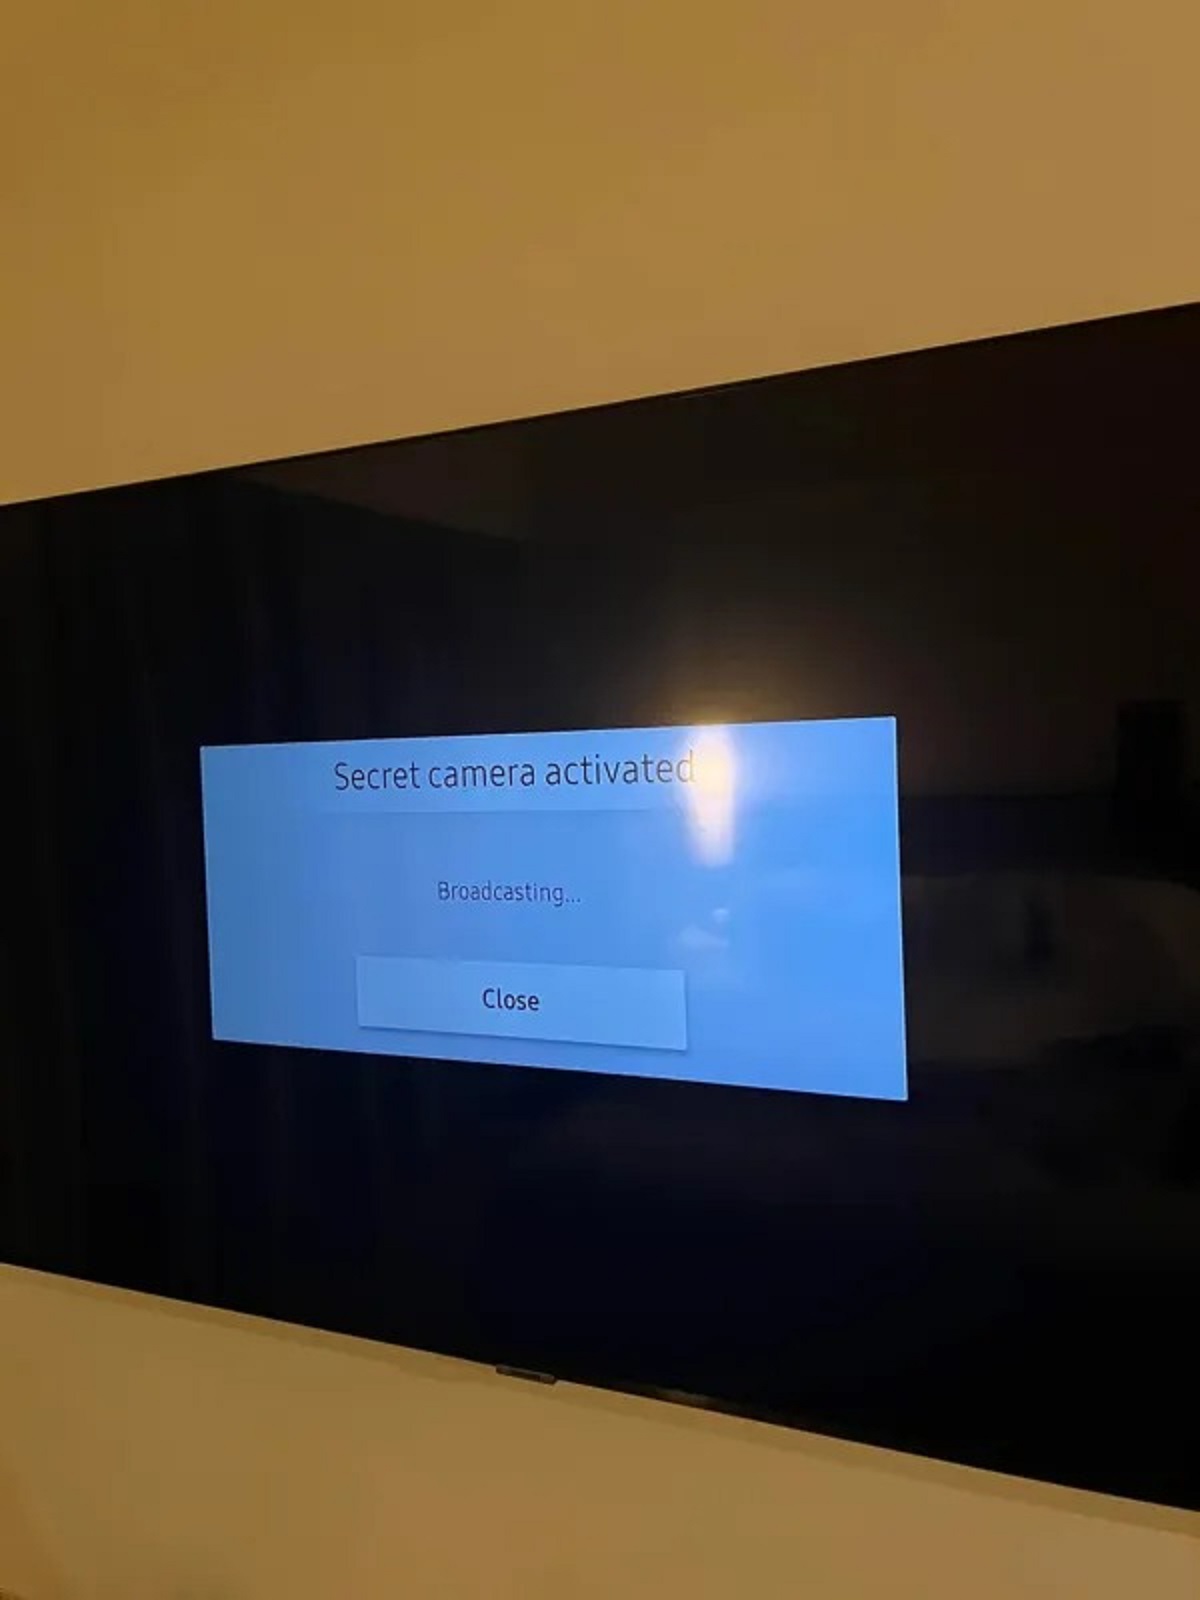 TIL you can change a hotel TVs welcome message.